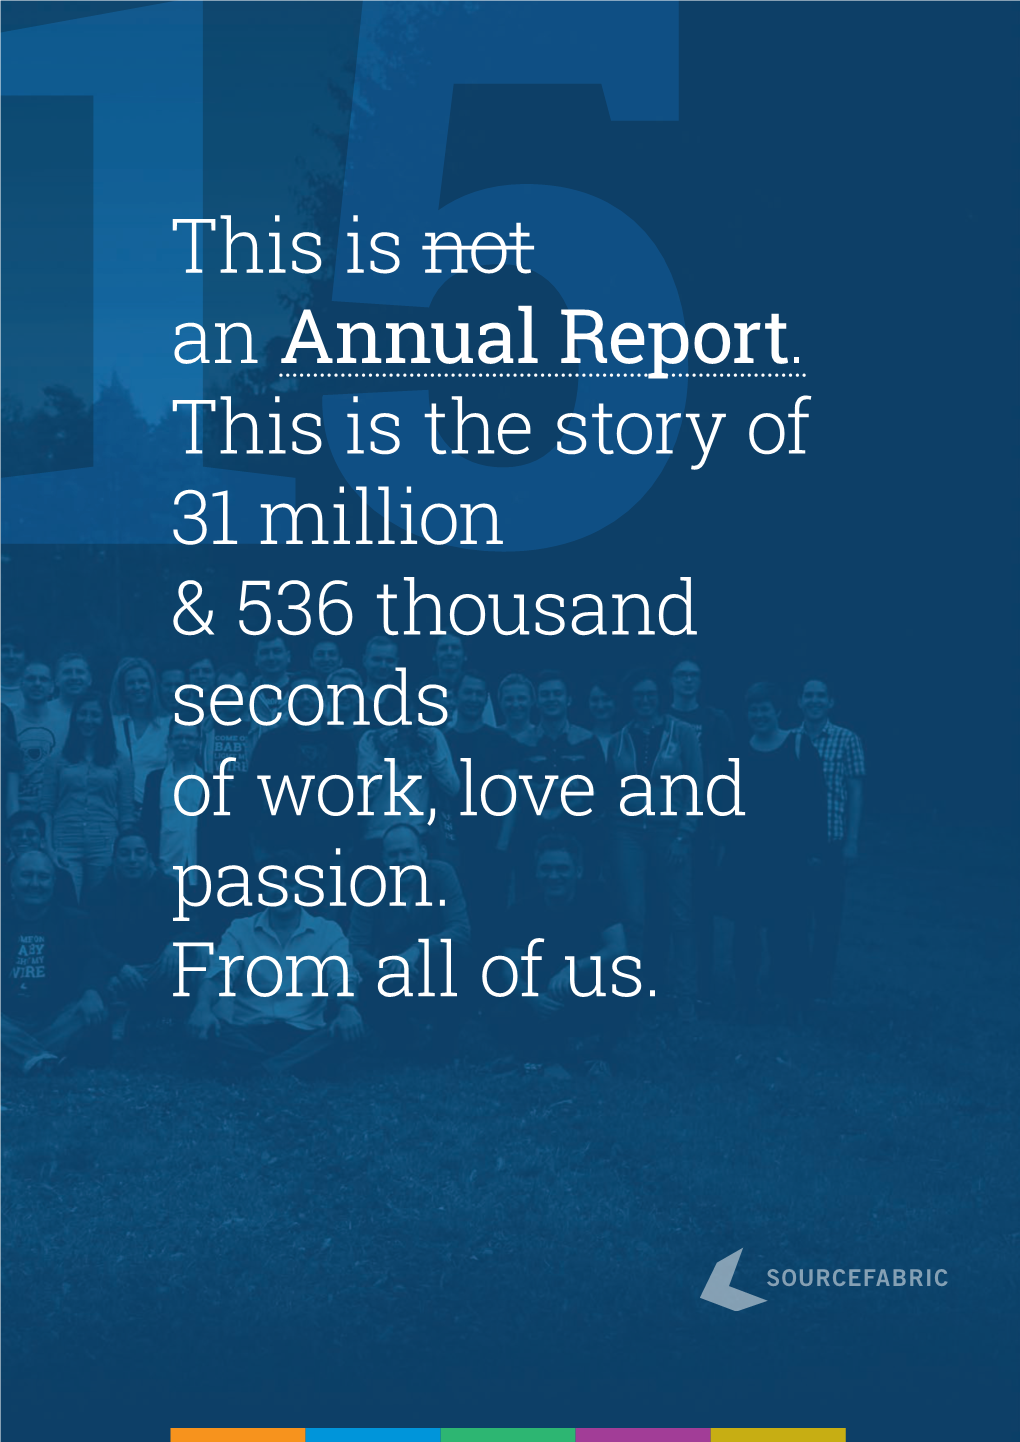 15This Is Not an Annual Report. This Is the Story of 31 Million & 536 Thousand Seconds of Work, Love and Passion. from All O